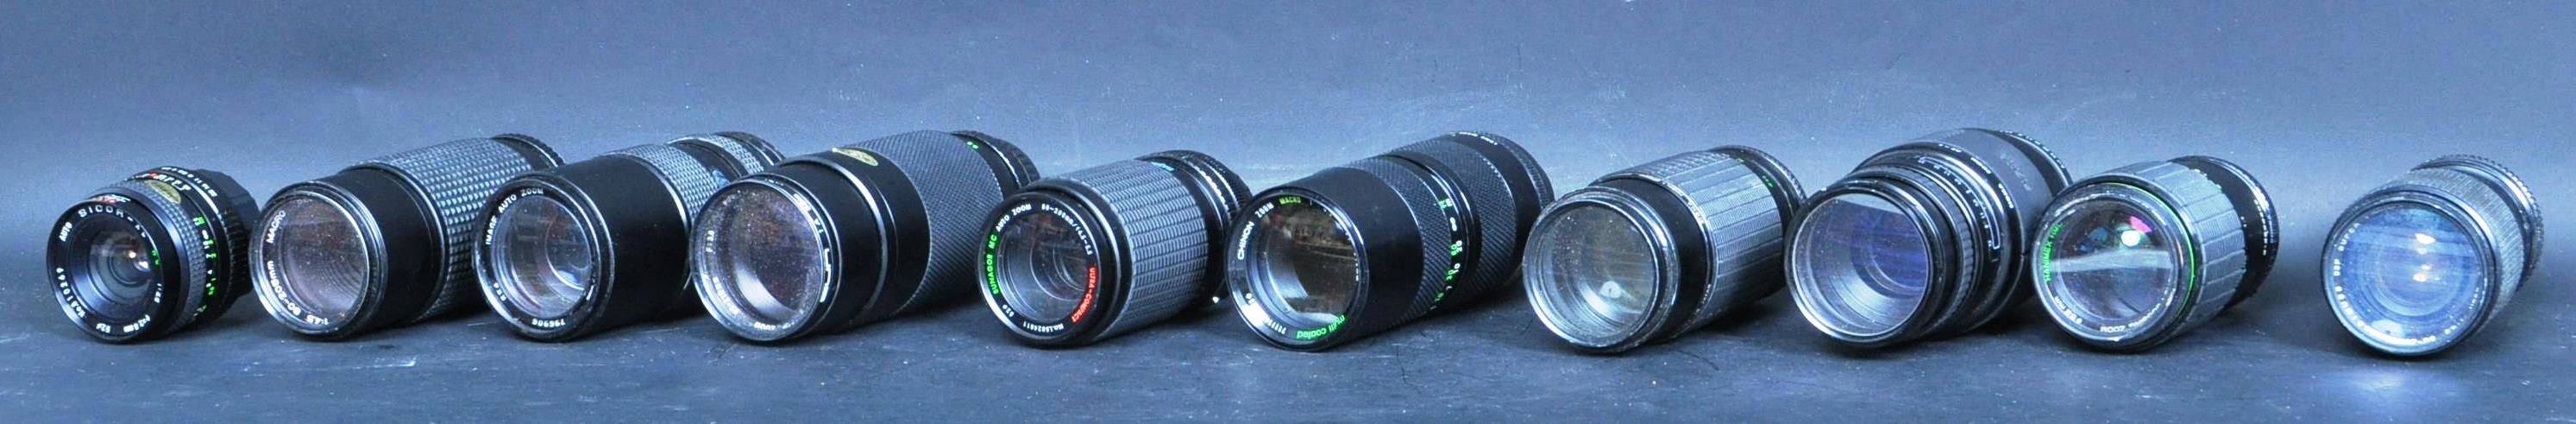 COLLECTION OF VINTAGE PHOTOGRAPHIC CAMERA LENSES